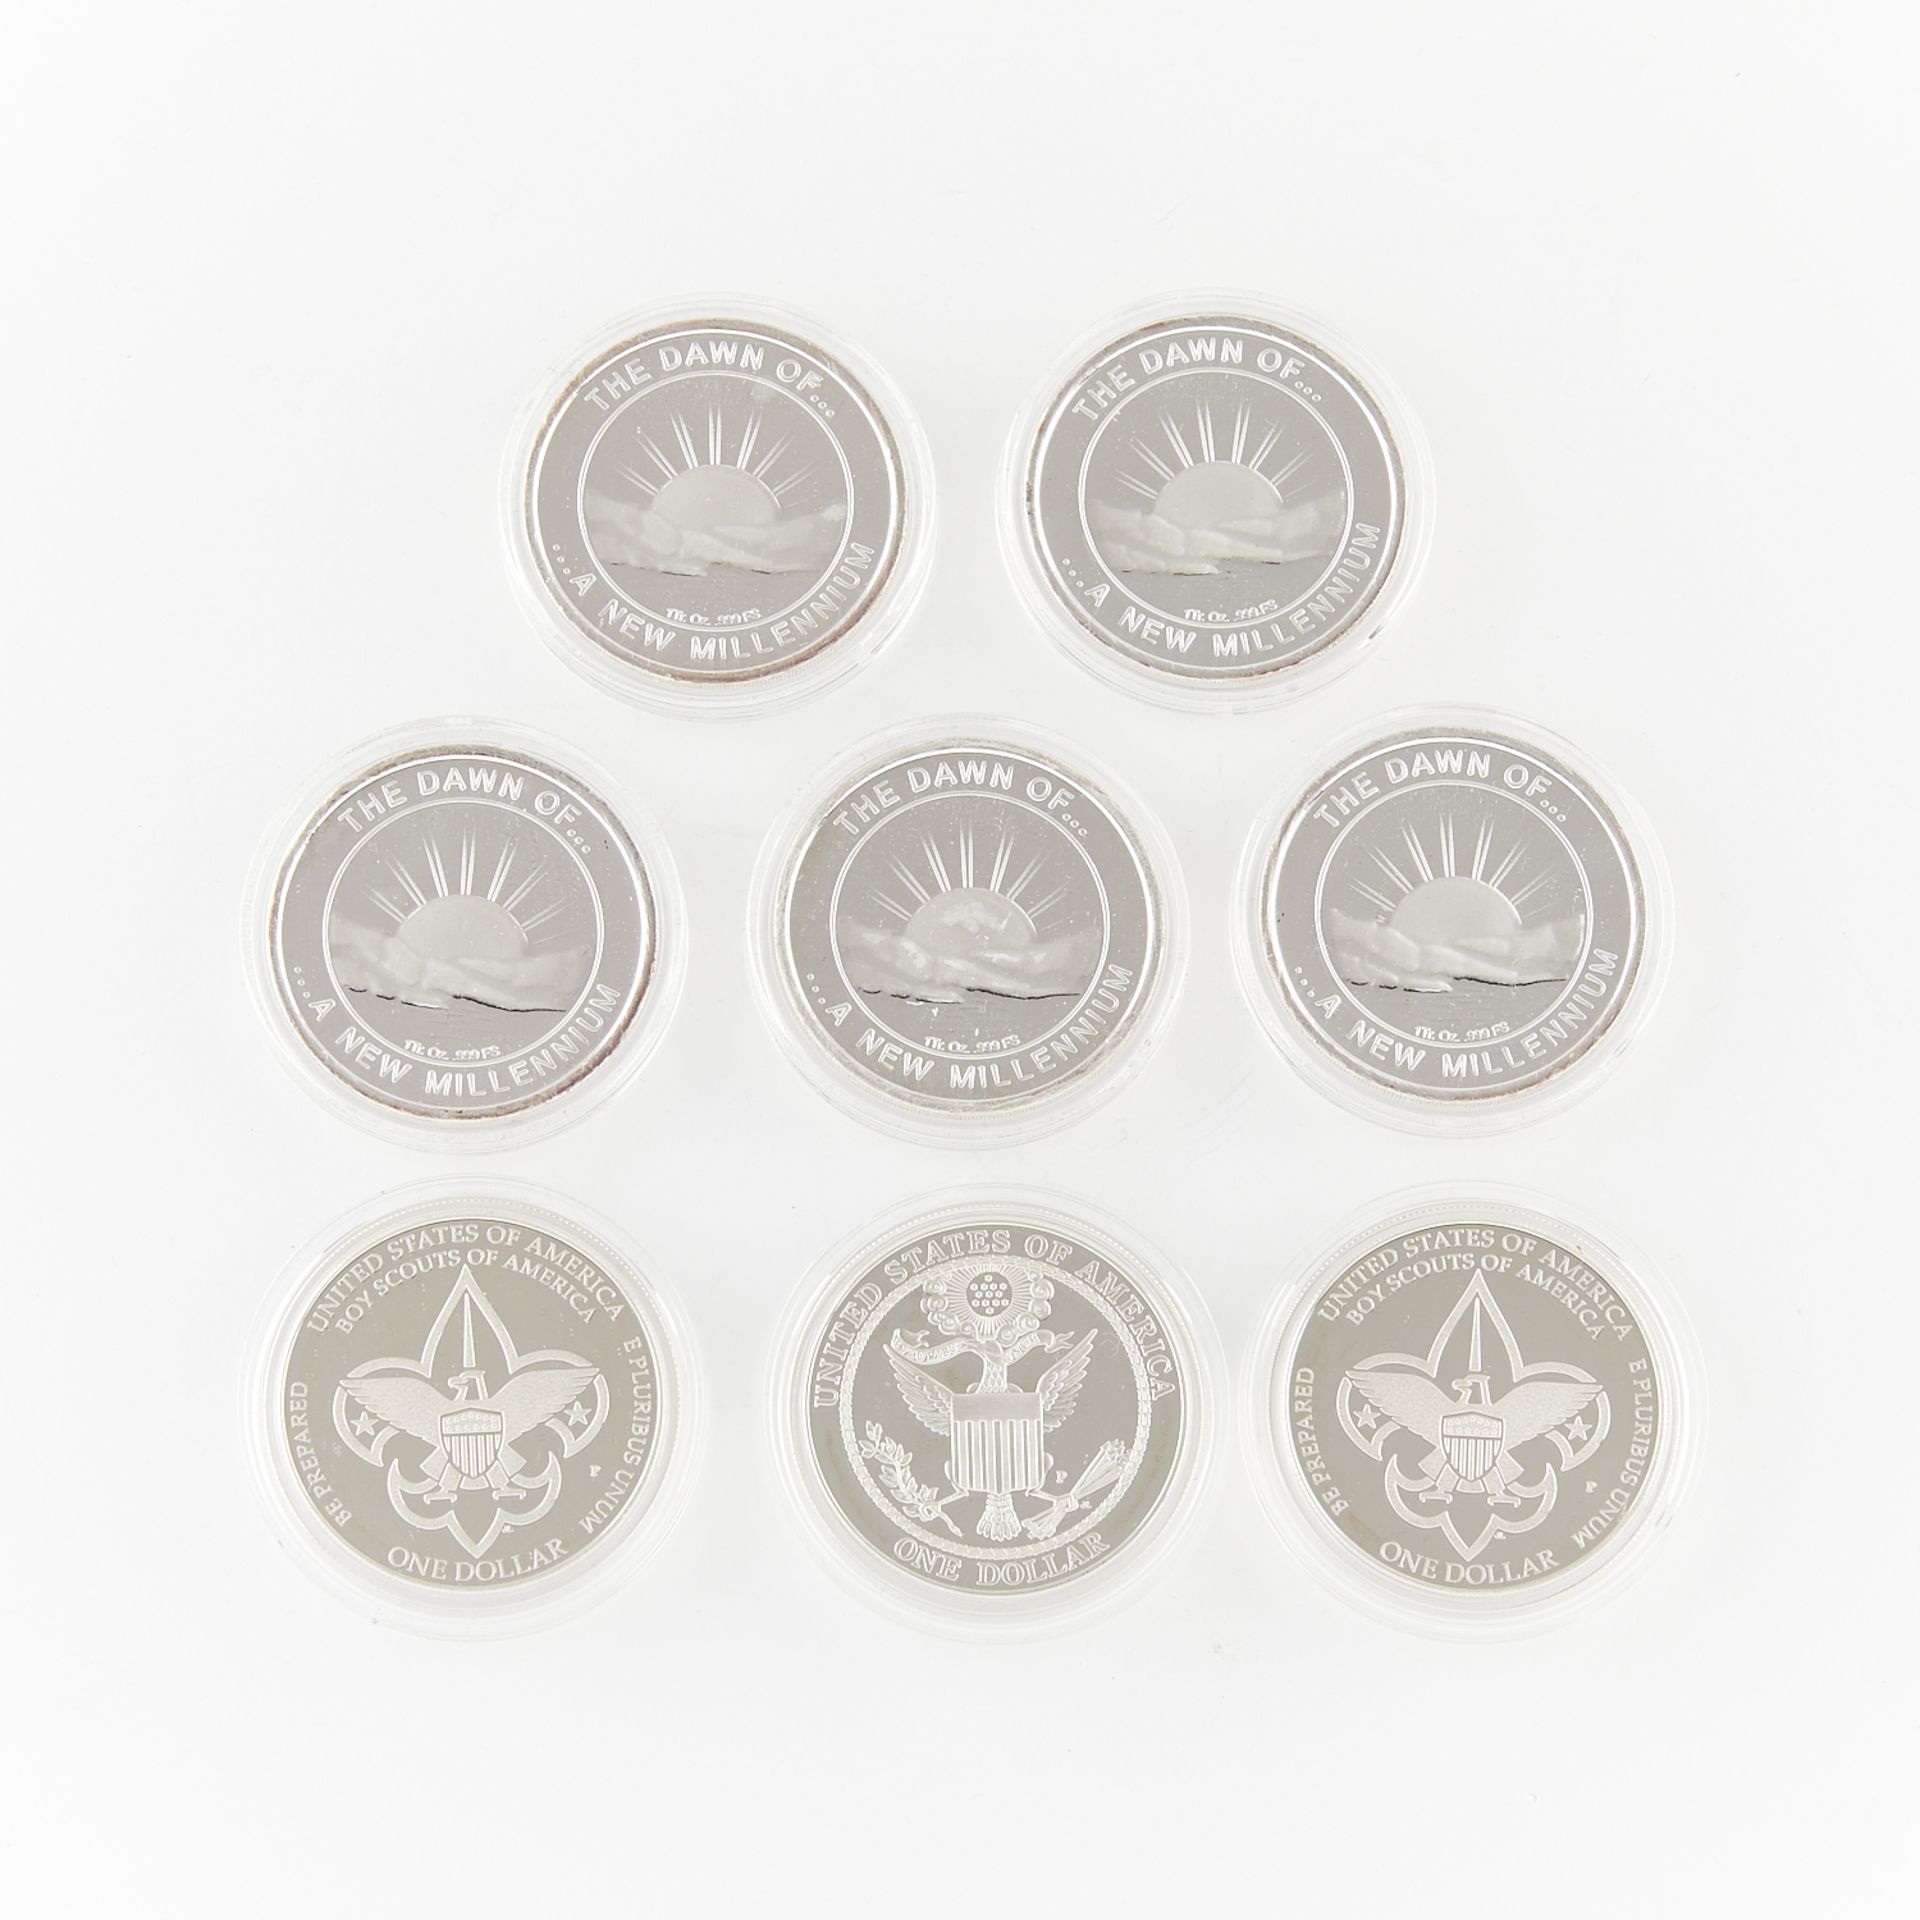 8 Silver United States Commemorative Coins - Image 2 of 3